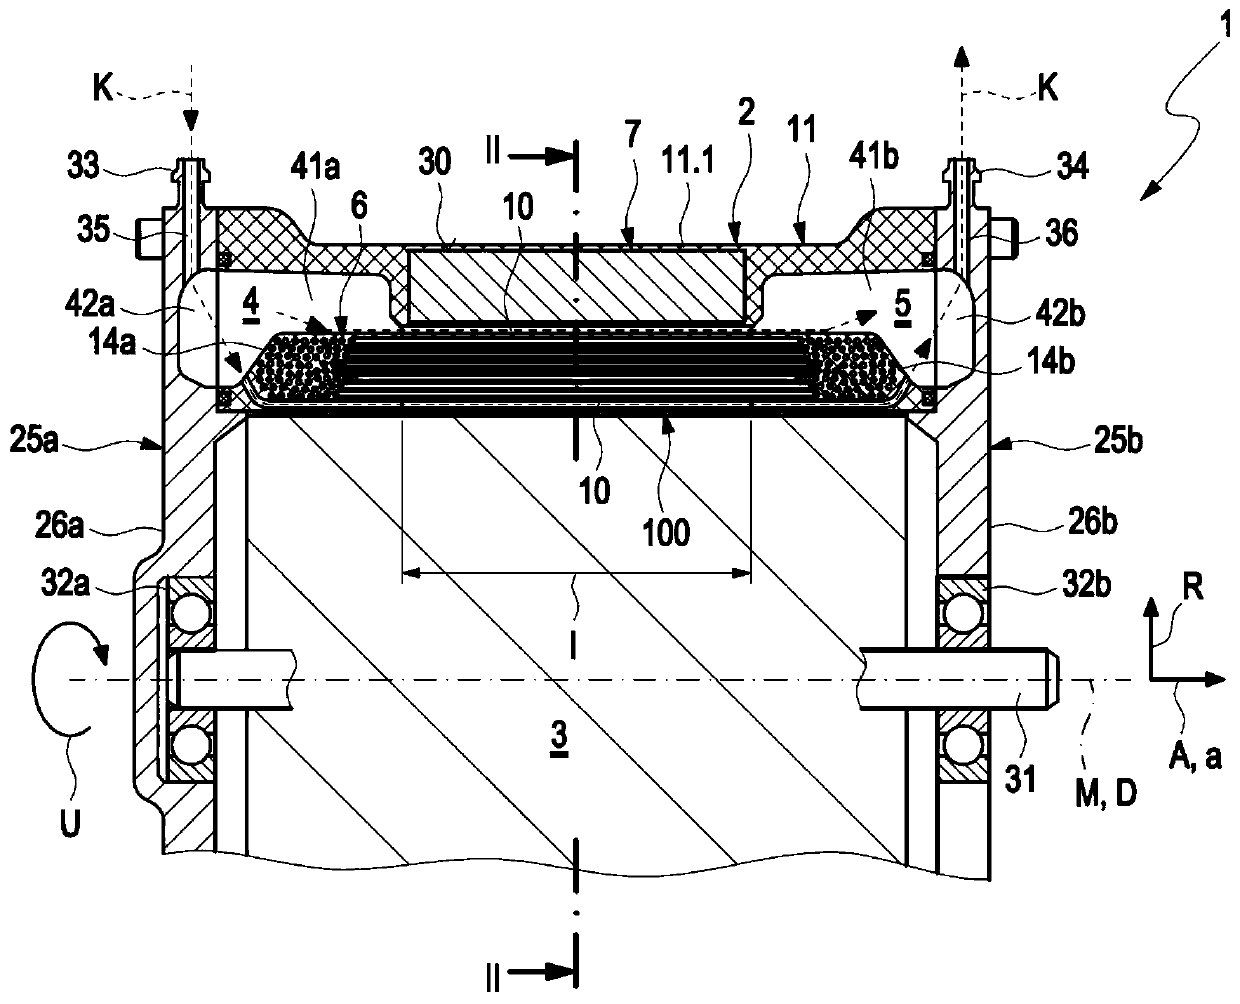 Insulation body for an electrical machine